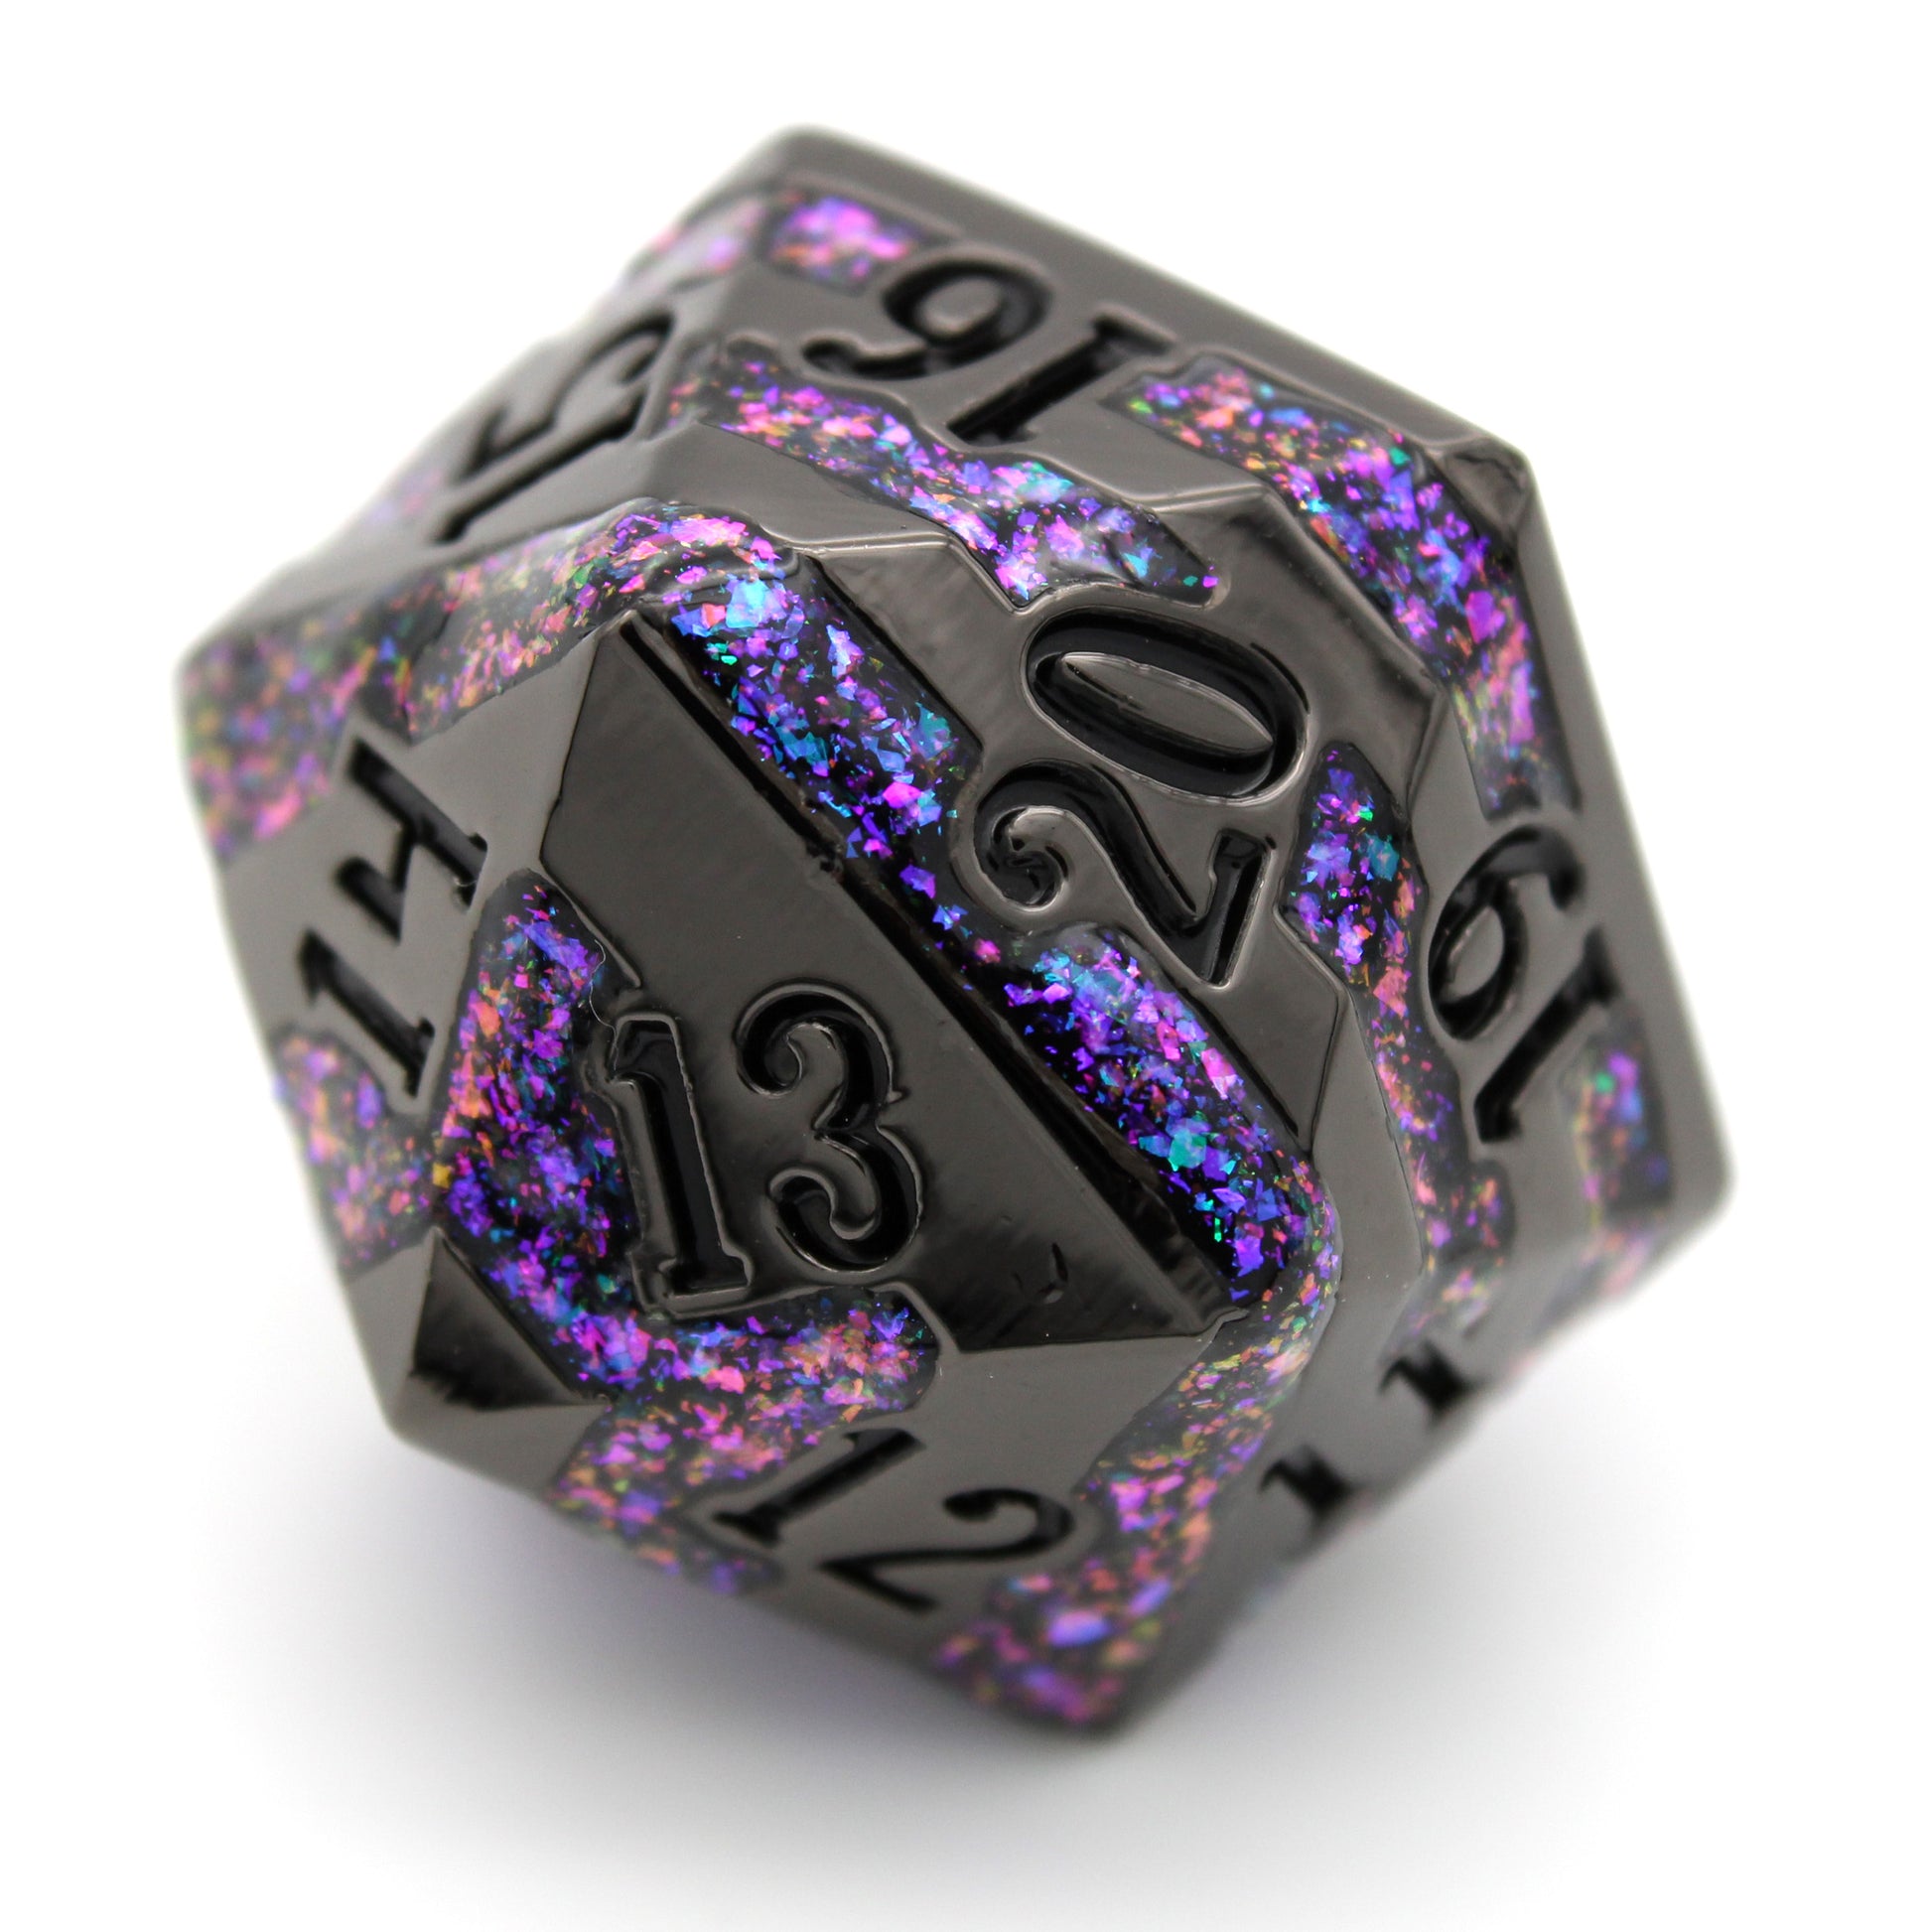 Each Spindown Life Counter measures in at a whopping 25mm, crafted from shiny black zinc and banded with glittery enamel. They are part of the Cyberpunk collection, sister to our Steampunk collection.